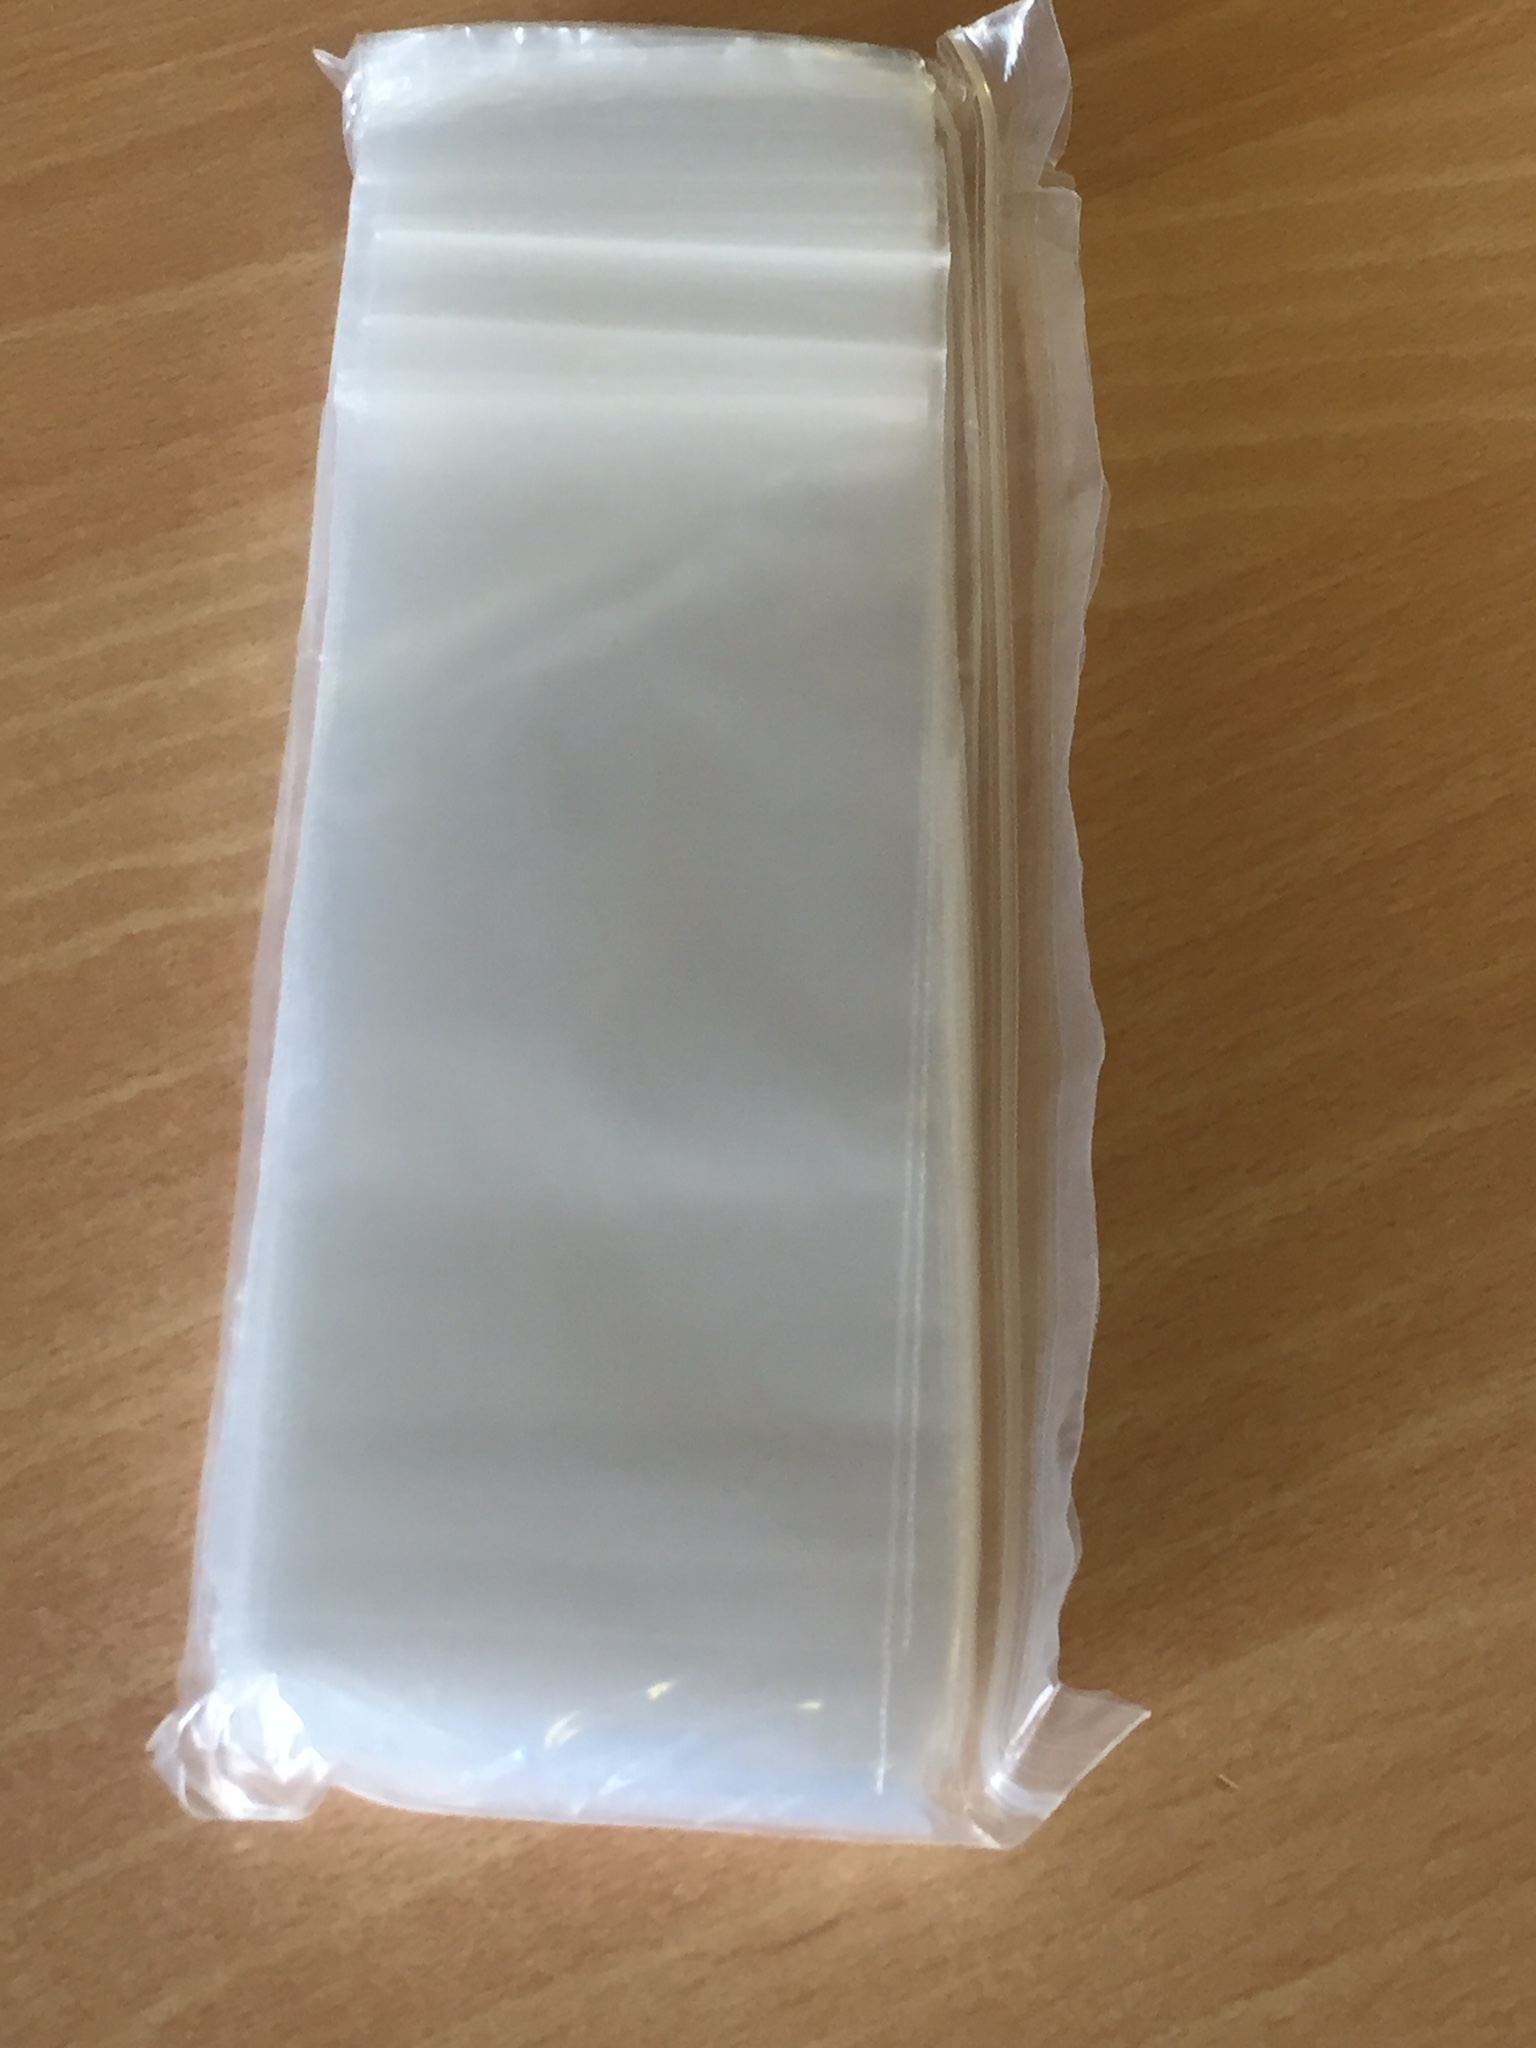 Grip Seal Bag - Small Pack 200